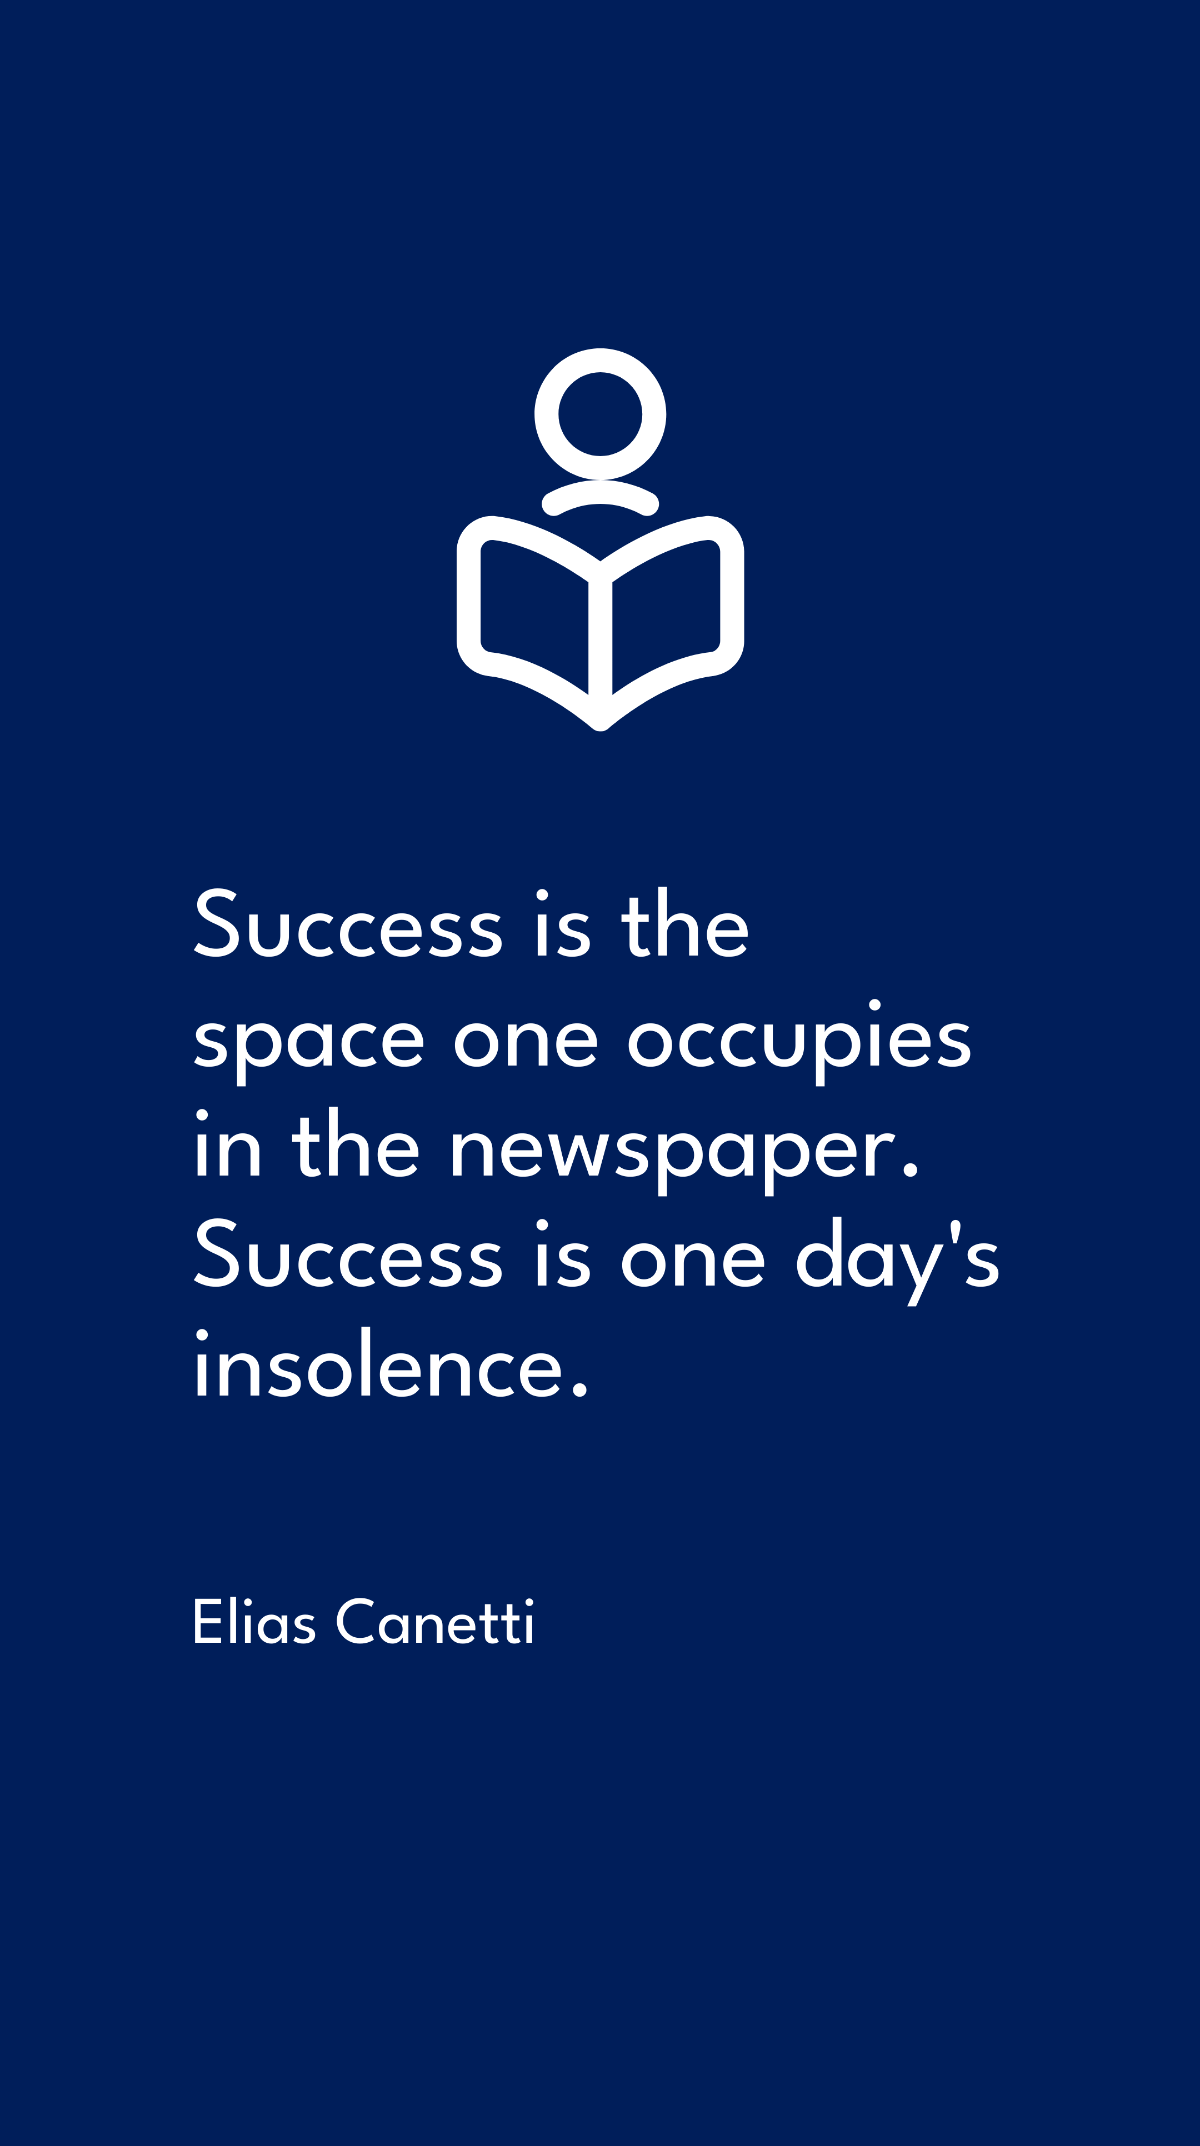 Elias Canetti - Success is the space one occupies in the newspaper. Success is one day's insolence.